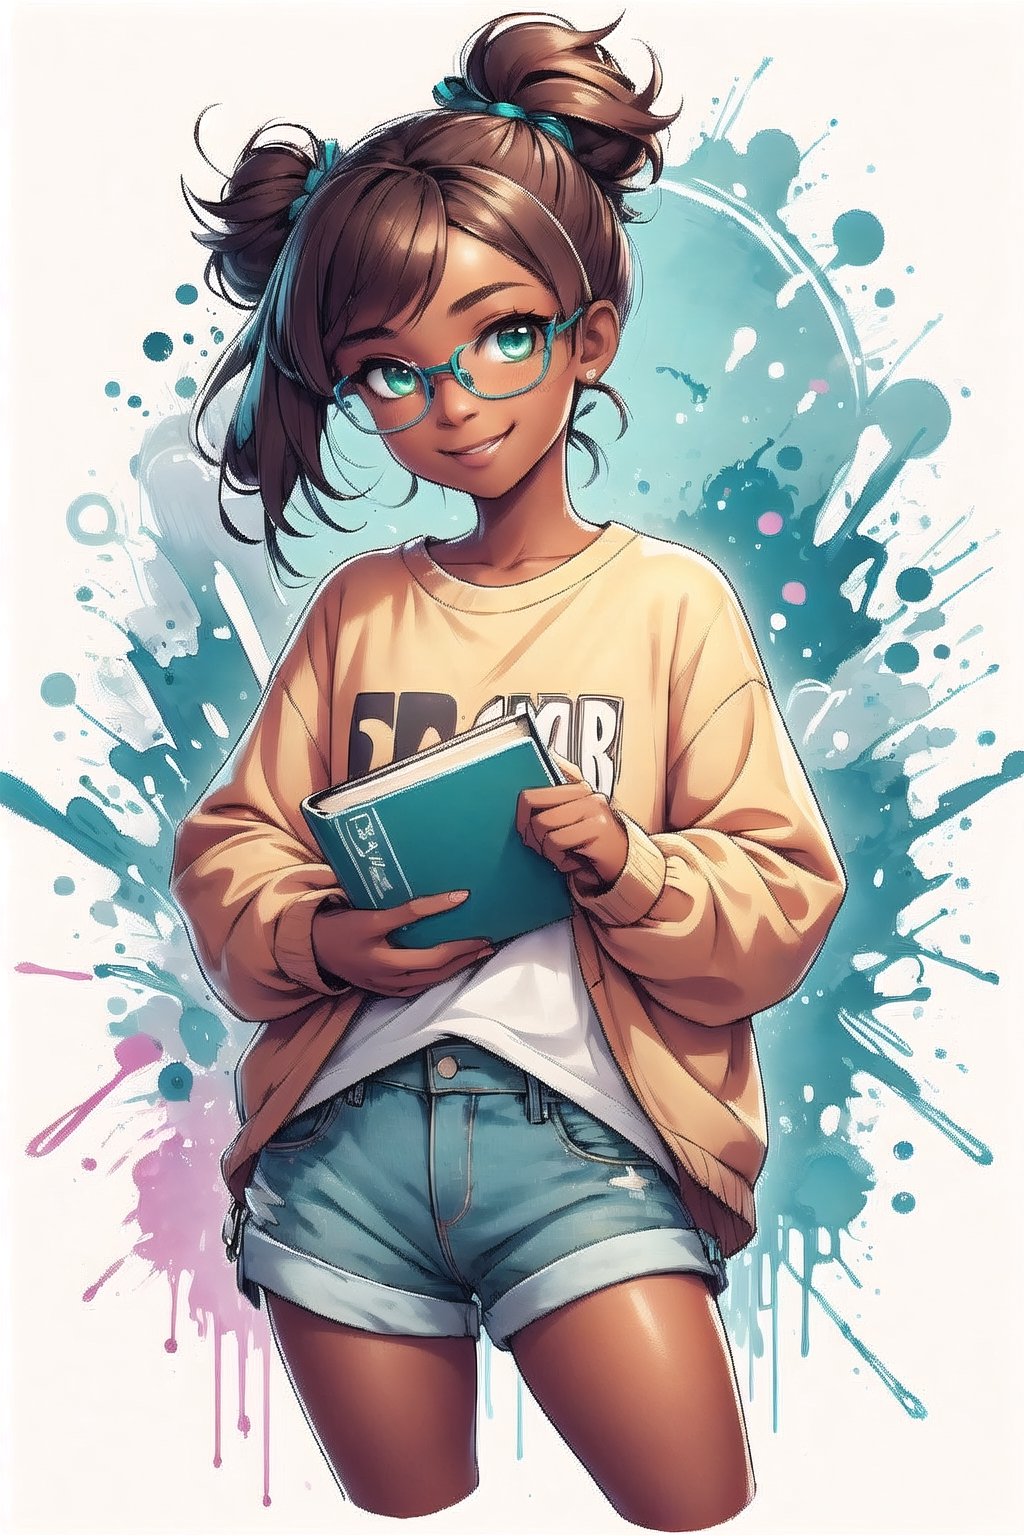 black girl,smile,book,big green eyes,graffiti spray paint art,Grt2c,Chromaspots,BrgEy

chunly hair style, only brown hair color, she wears prescription glasses. Dressed in a full yellow long-sleeved shirt and light blue denim shorts